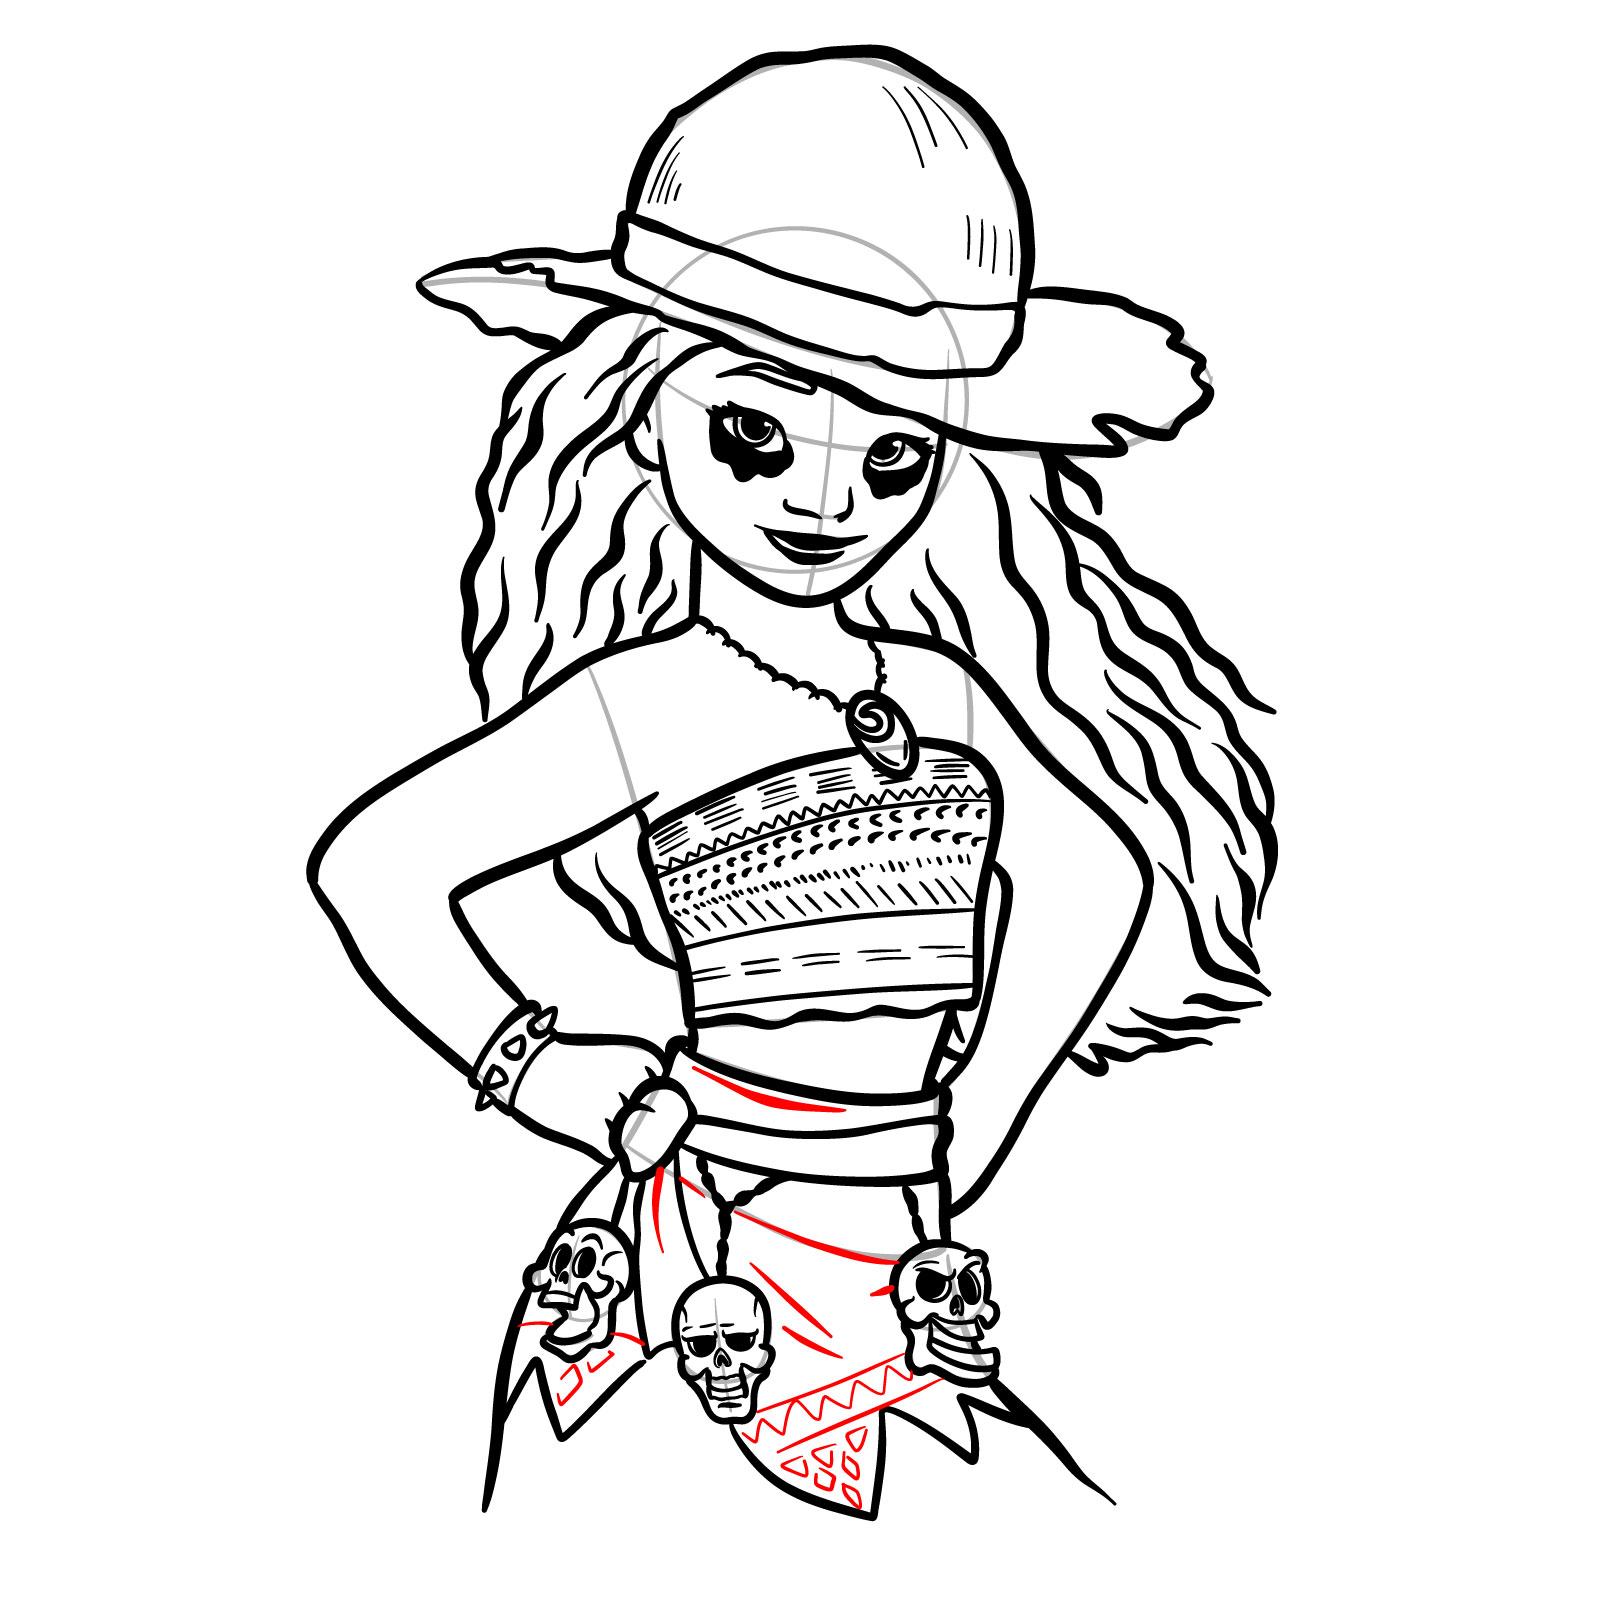 How to Draw Halloween Moana as a Staw Hat Pirate - step 39